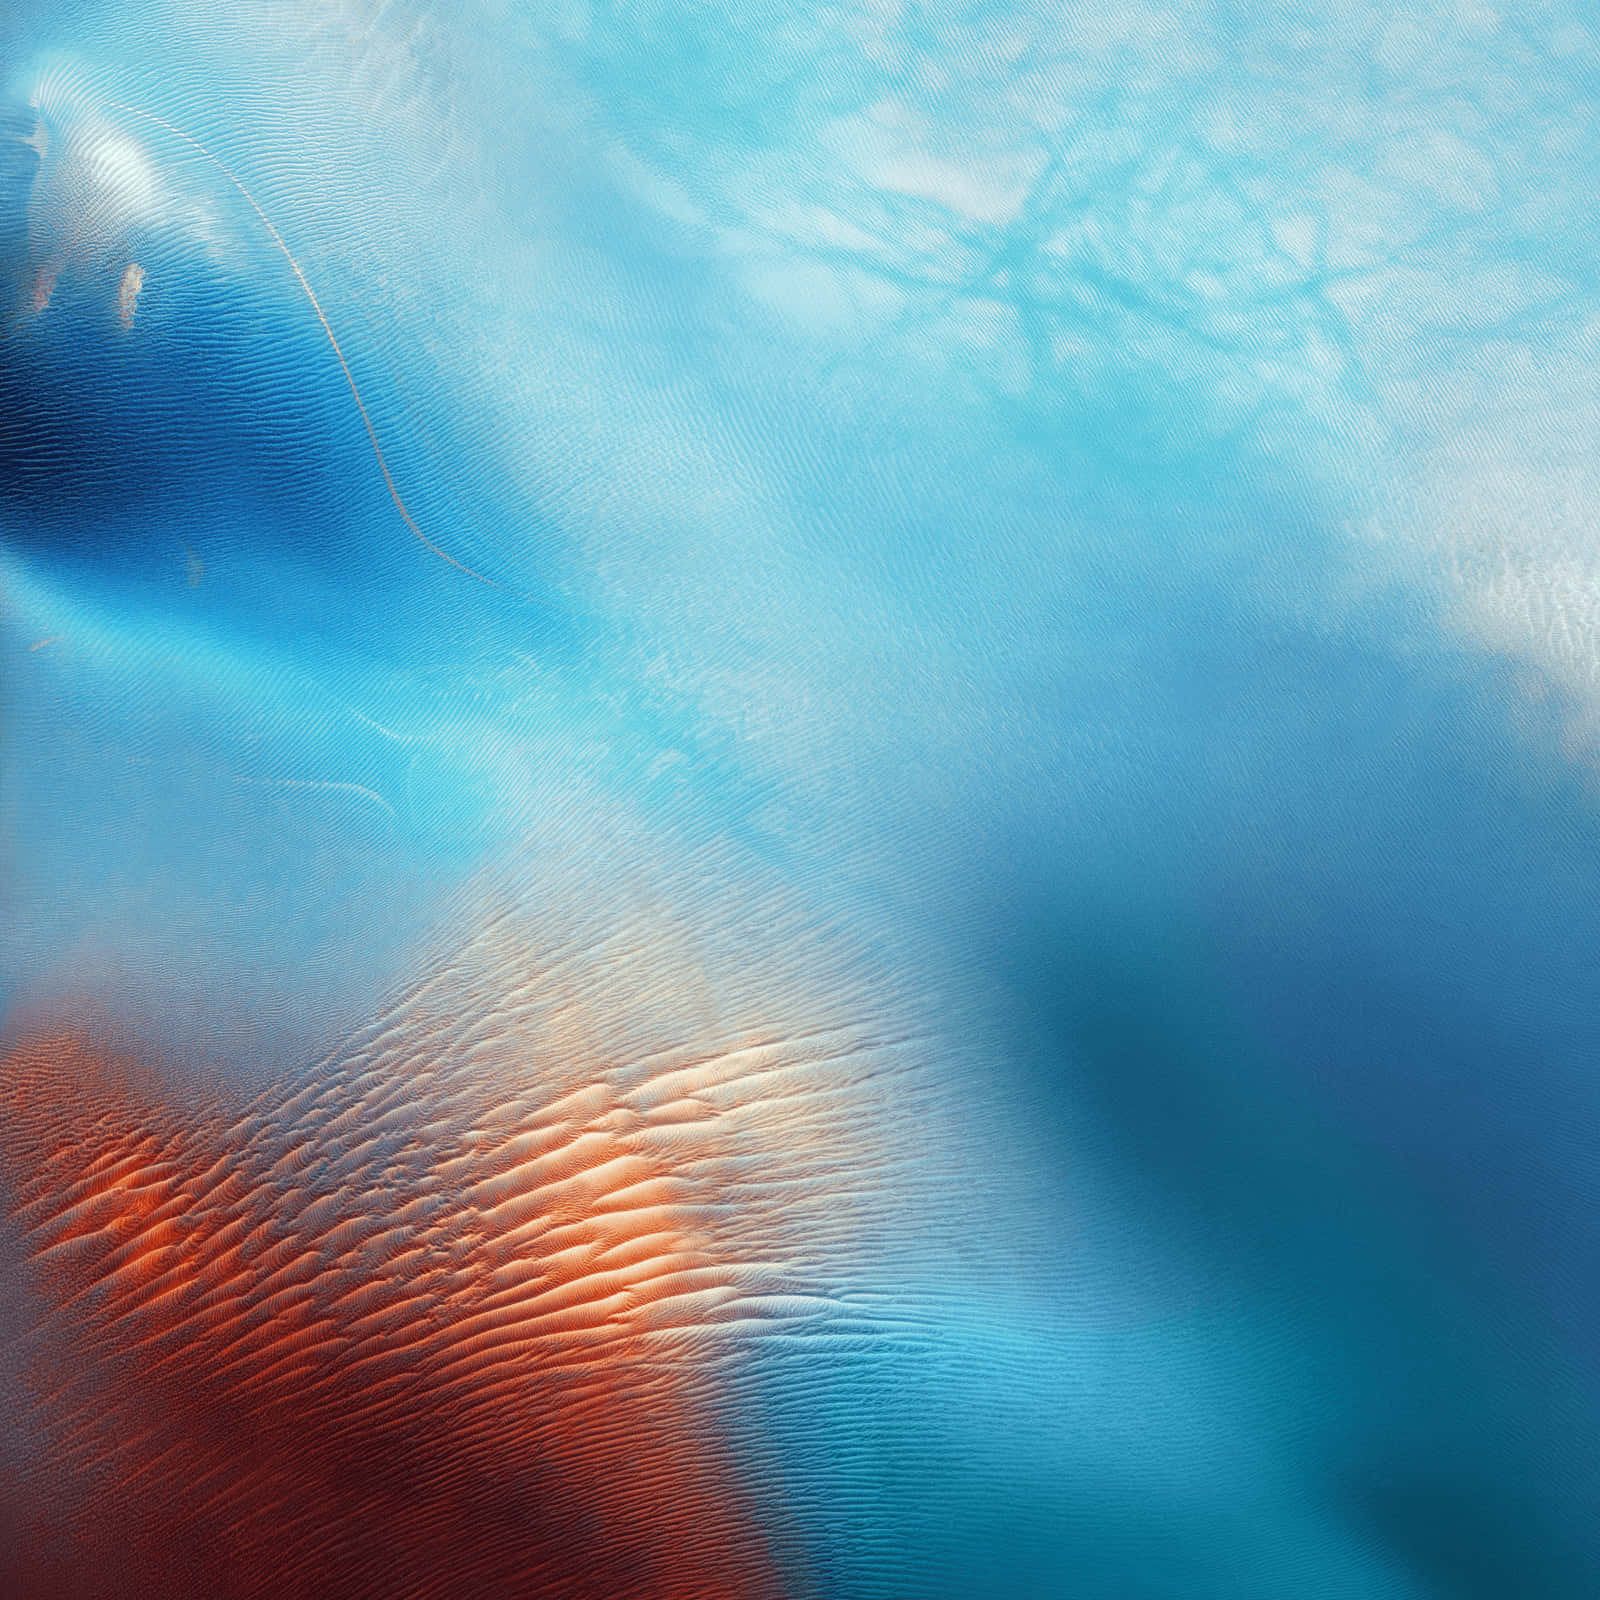 iPhone gradient waves wallpapers inspired by iPad mini